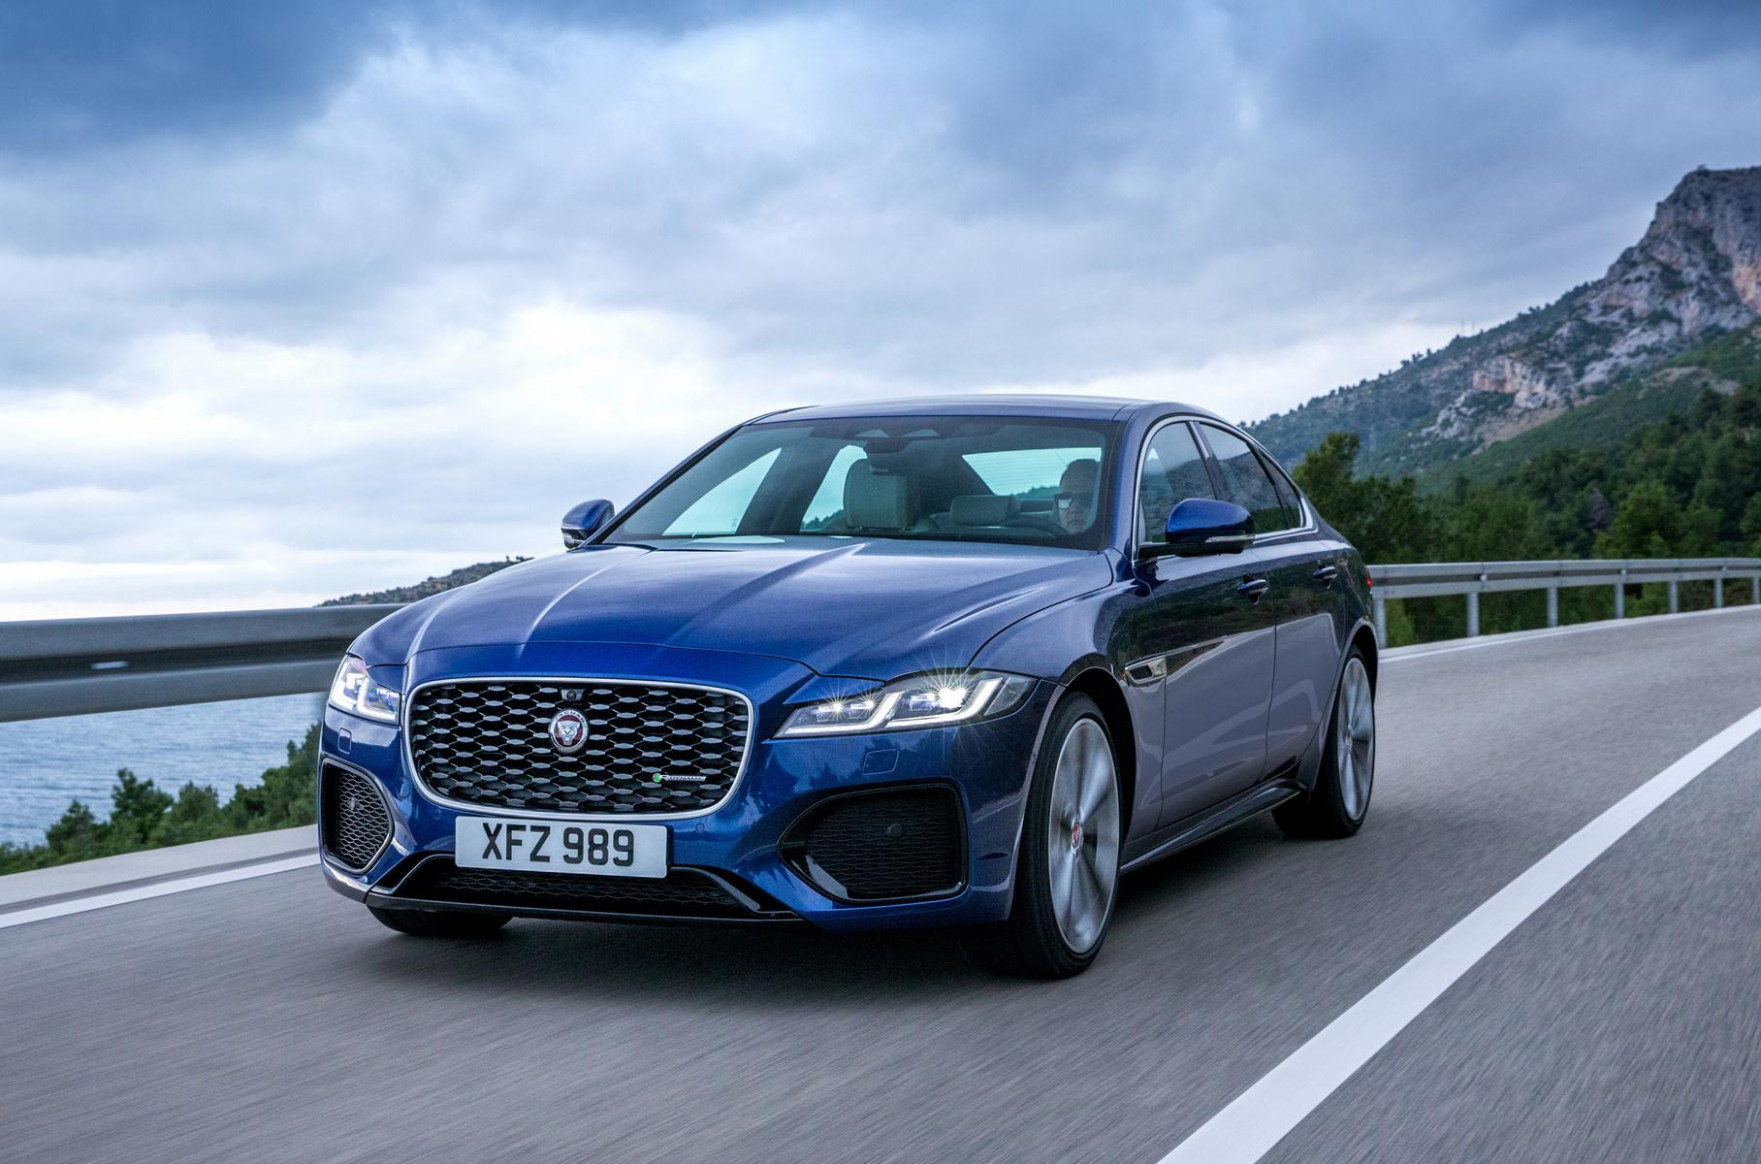 Performance And New Engine 2022 Jaguar Xe Review | New ...